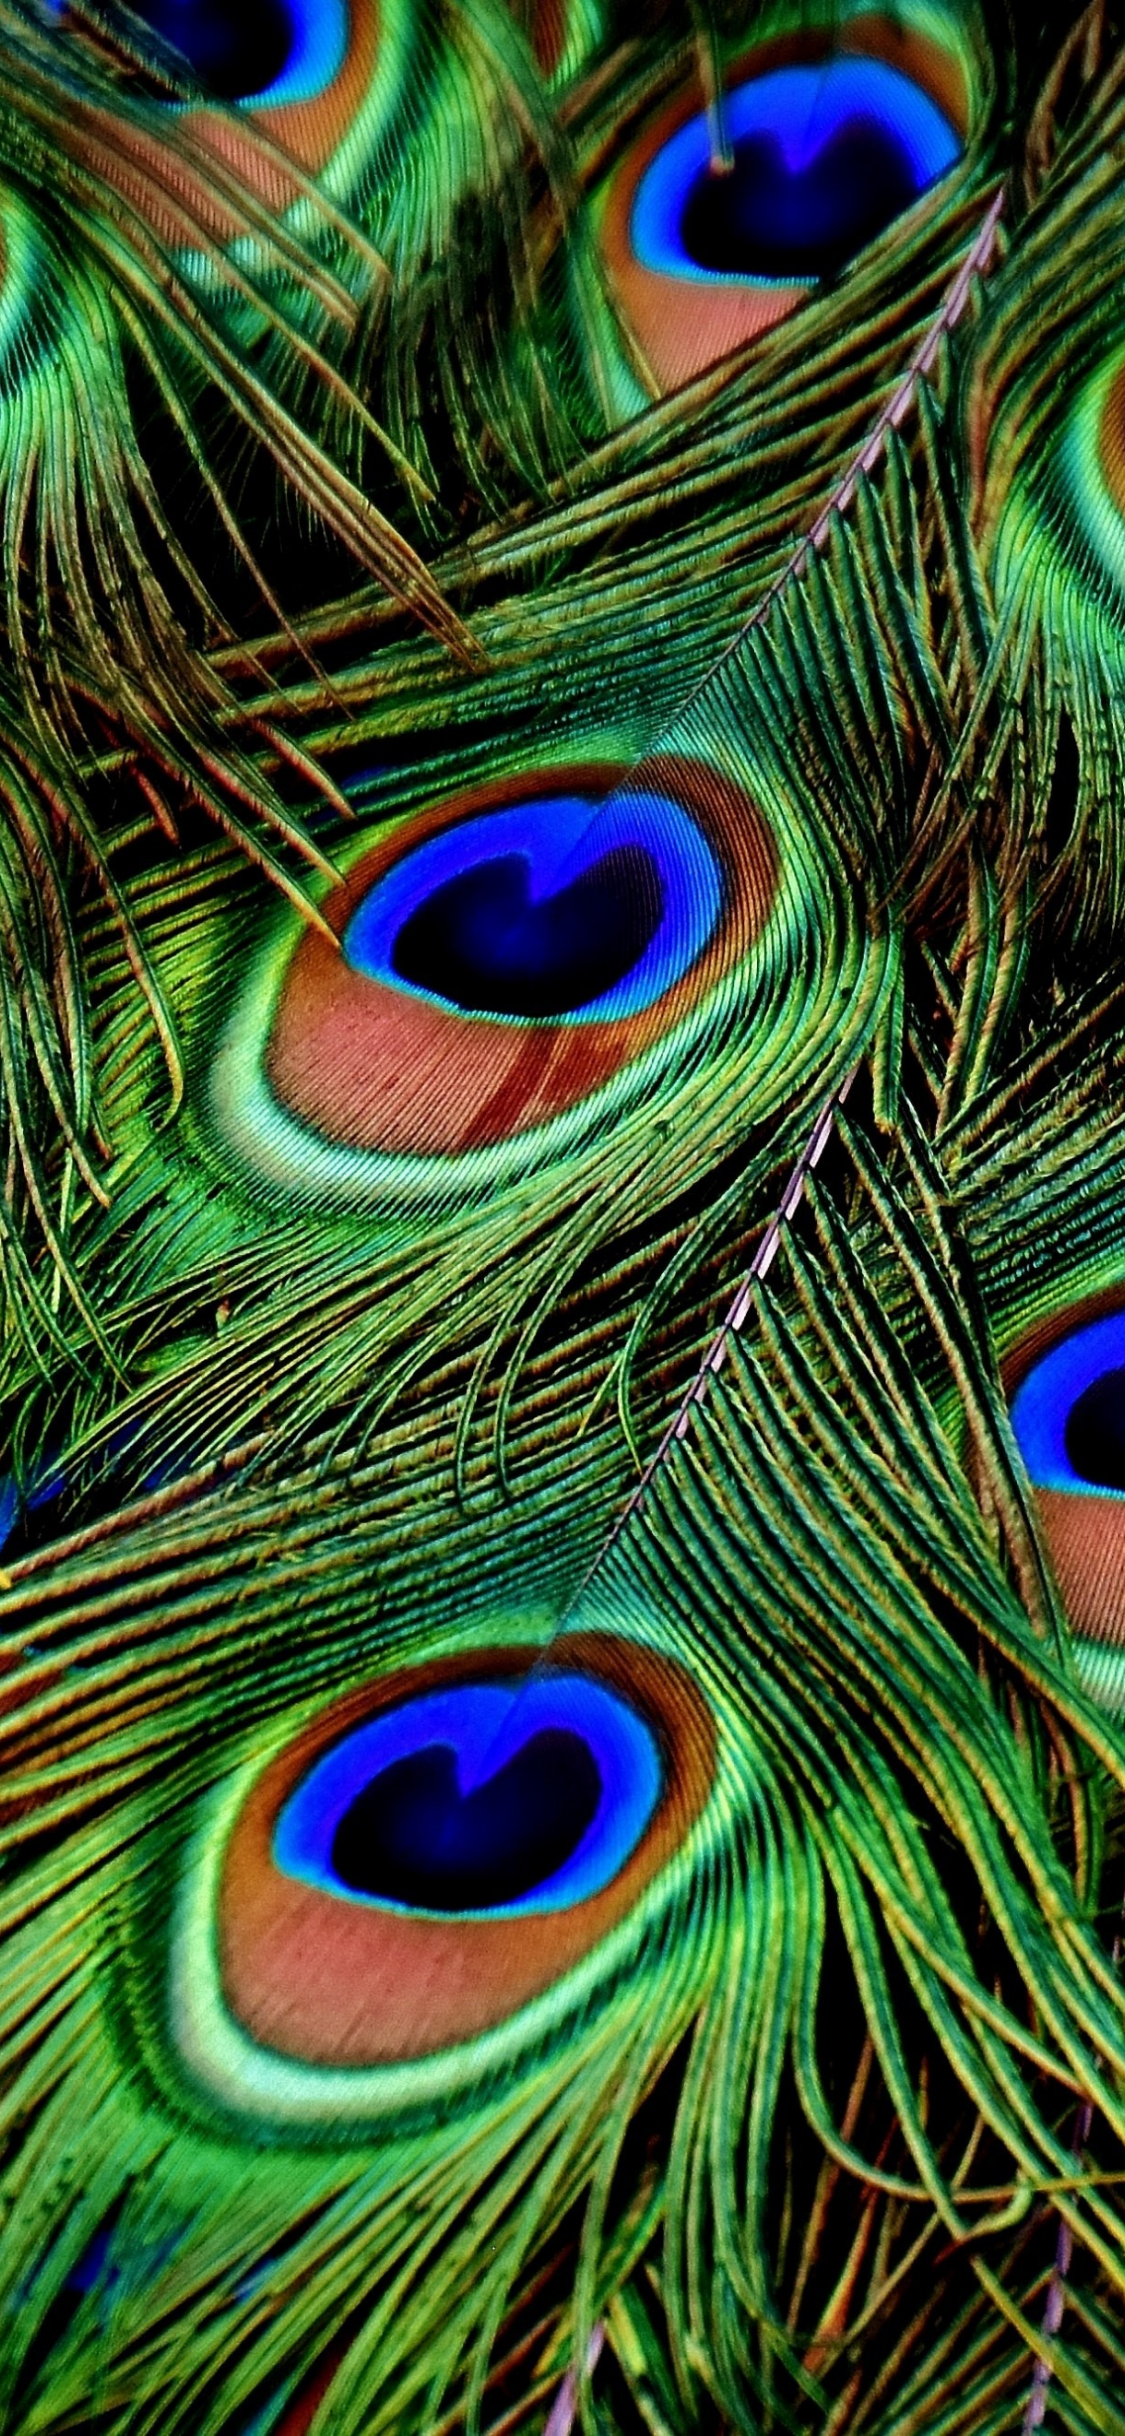 Peacock Feathers 4K Wallpapers | HD Wallpapers | ID #26685